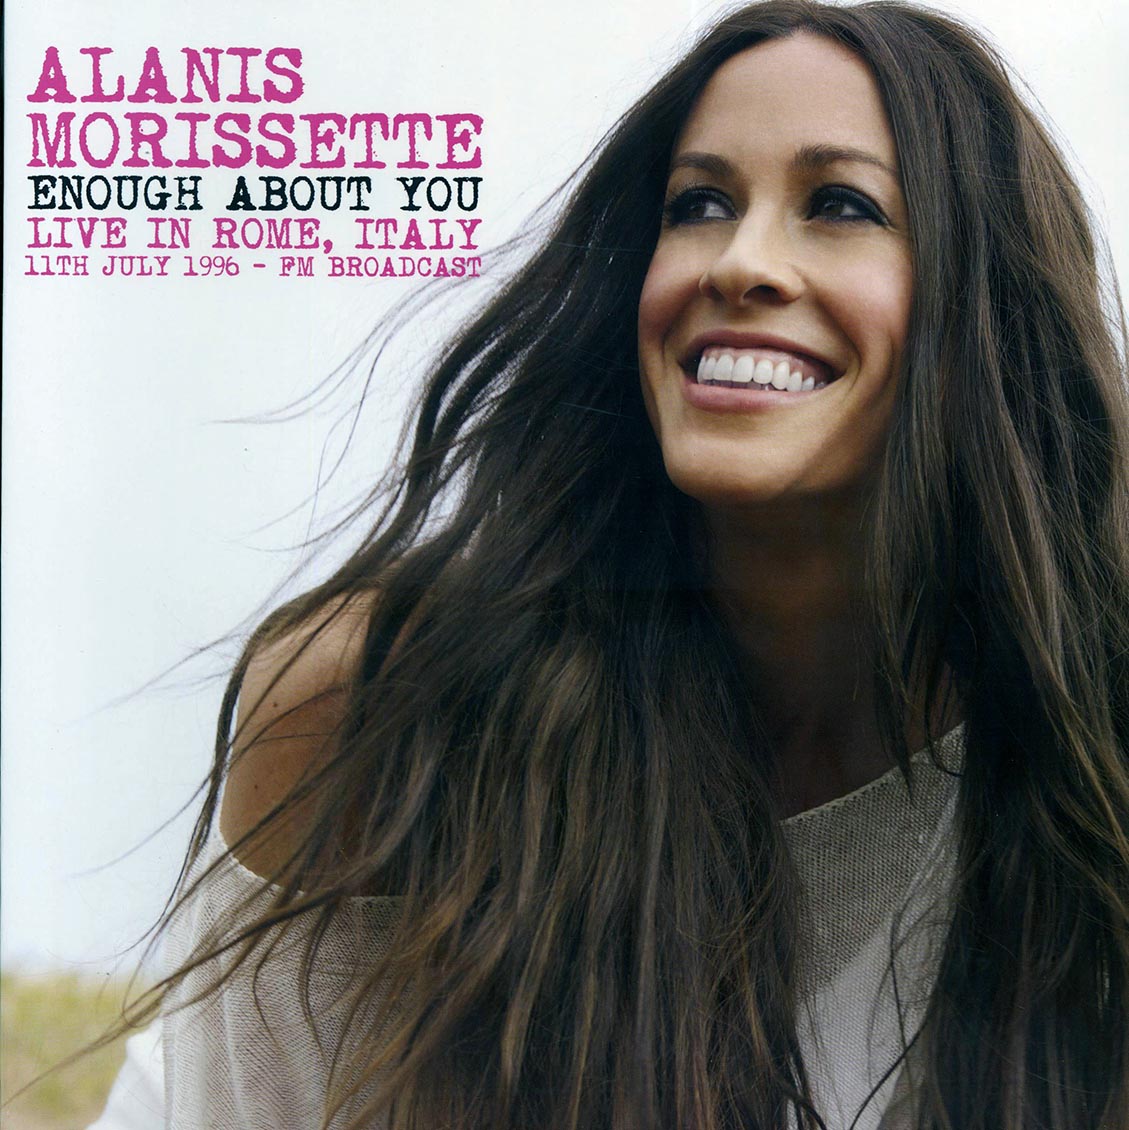 Alanis Morissette - Enough About You: Live In Rome, Italy, 11th July 1996 - Vinyl LP